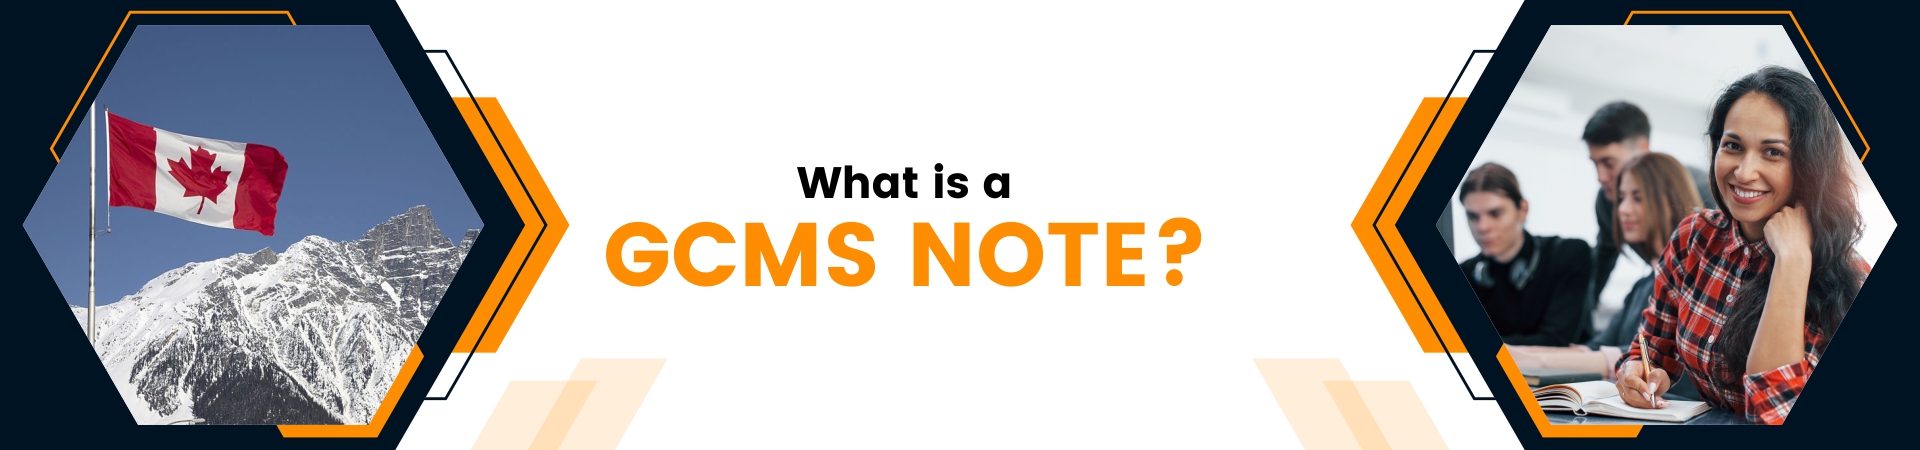 What is a GCMS note?